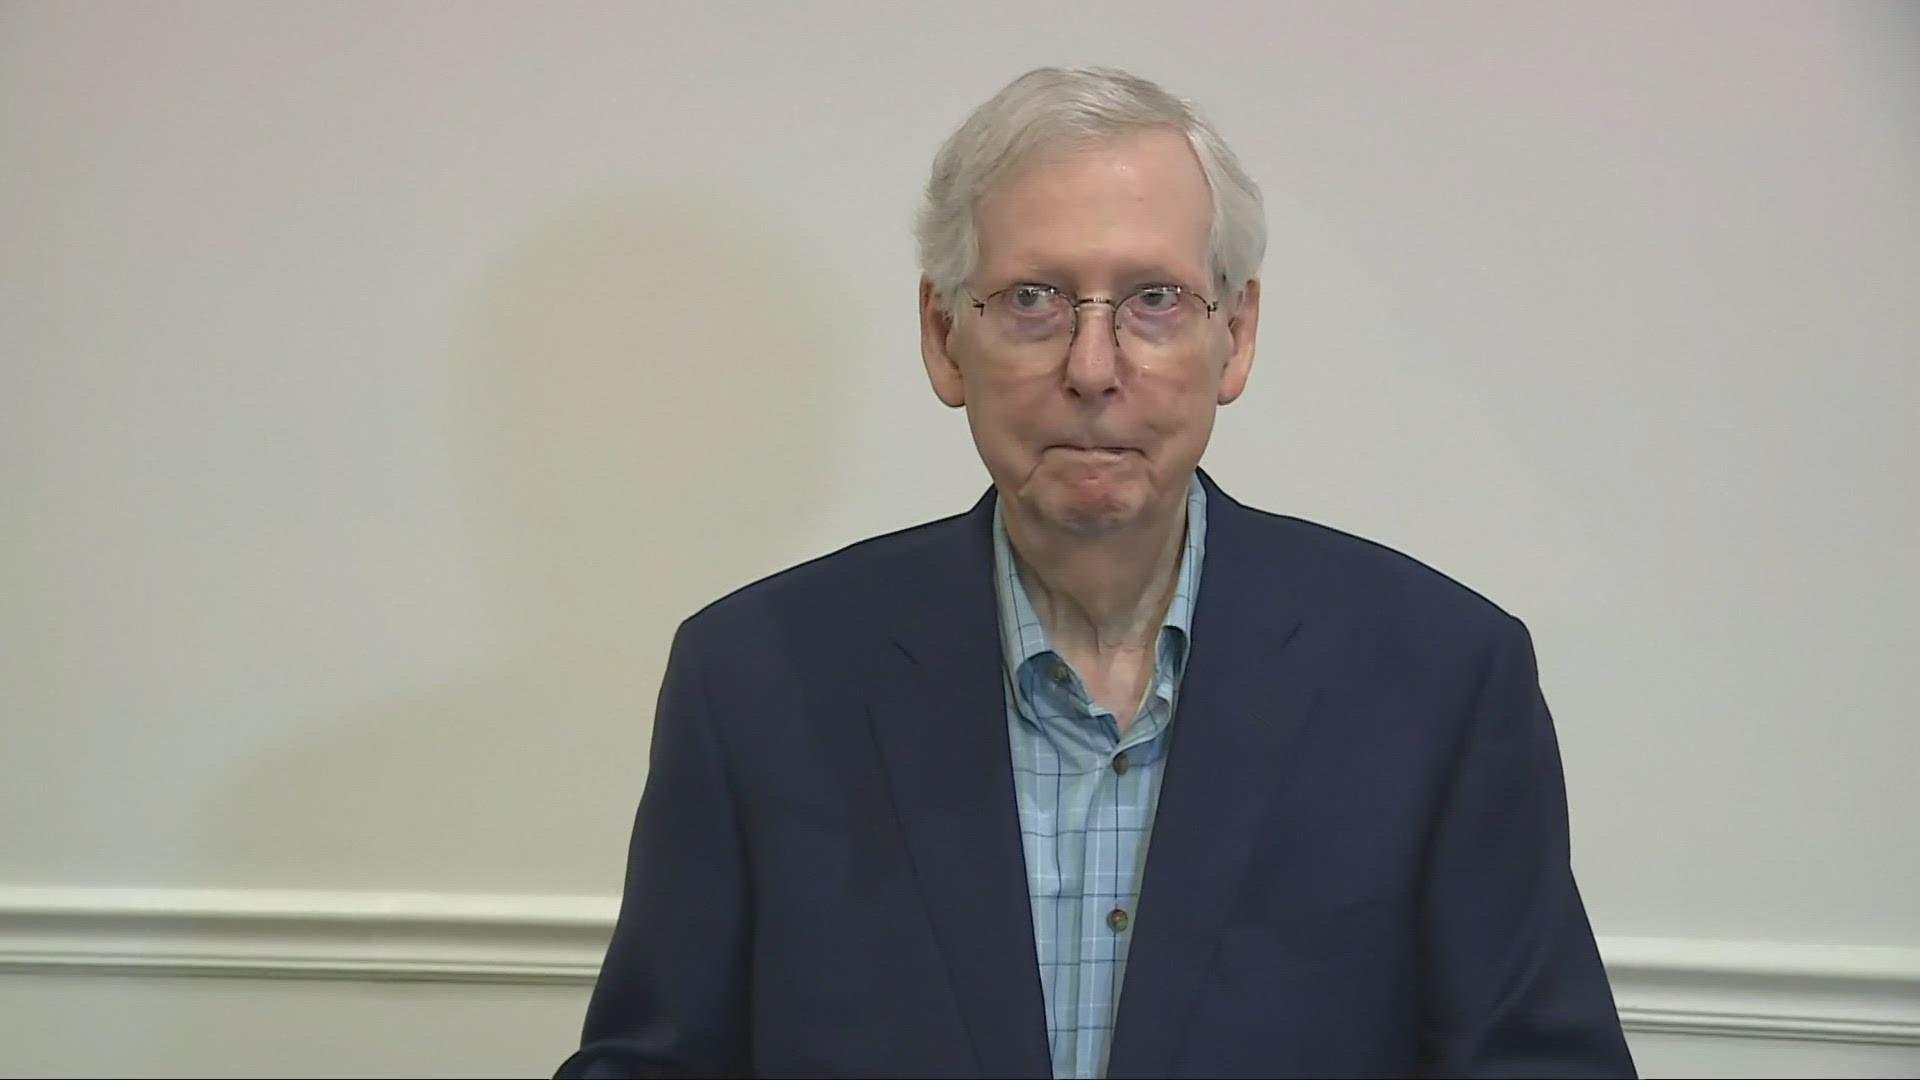 Sen. GOP leader Mitch McConnell was medically cleared a day he appeared to briefly freeze up and was unable to answer a question.